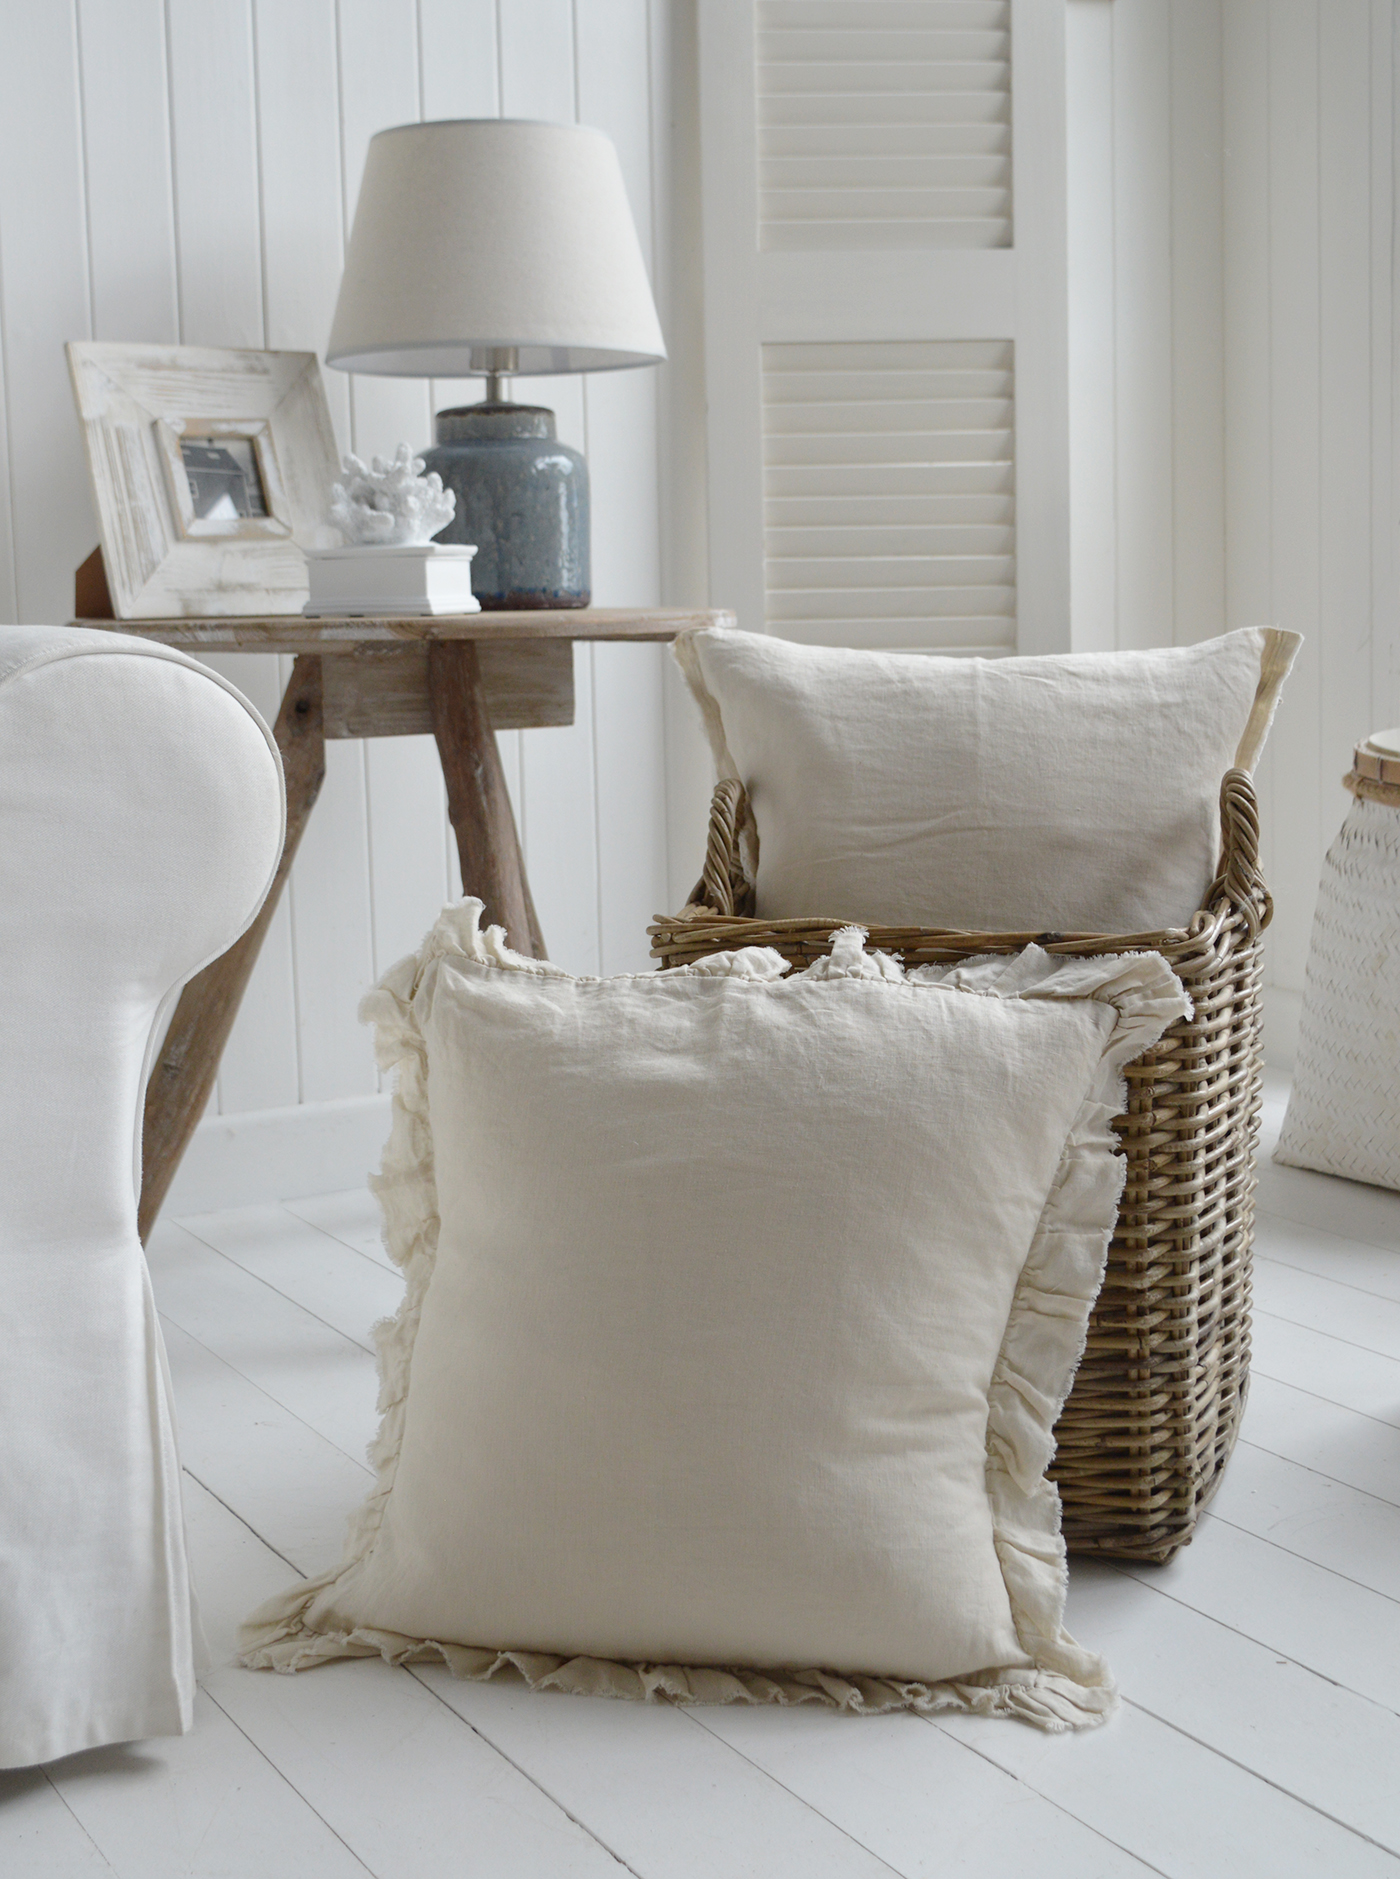 The Hamilton cream 100% linen cushion covers complementing the greyed Casco Bay basket in a beach house home